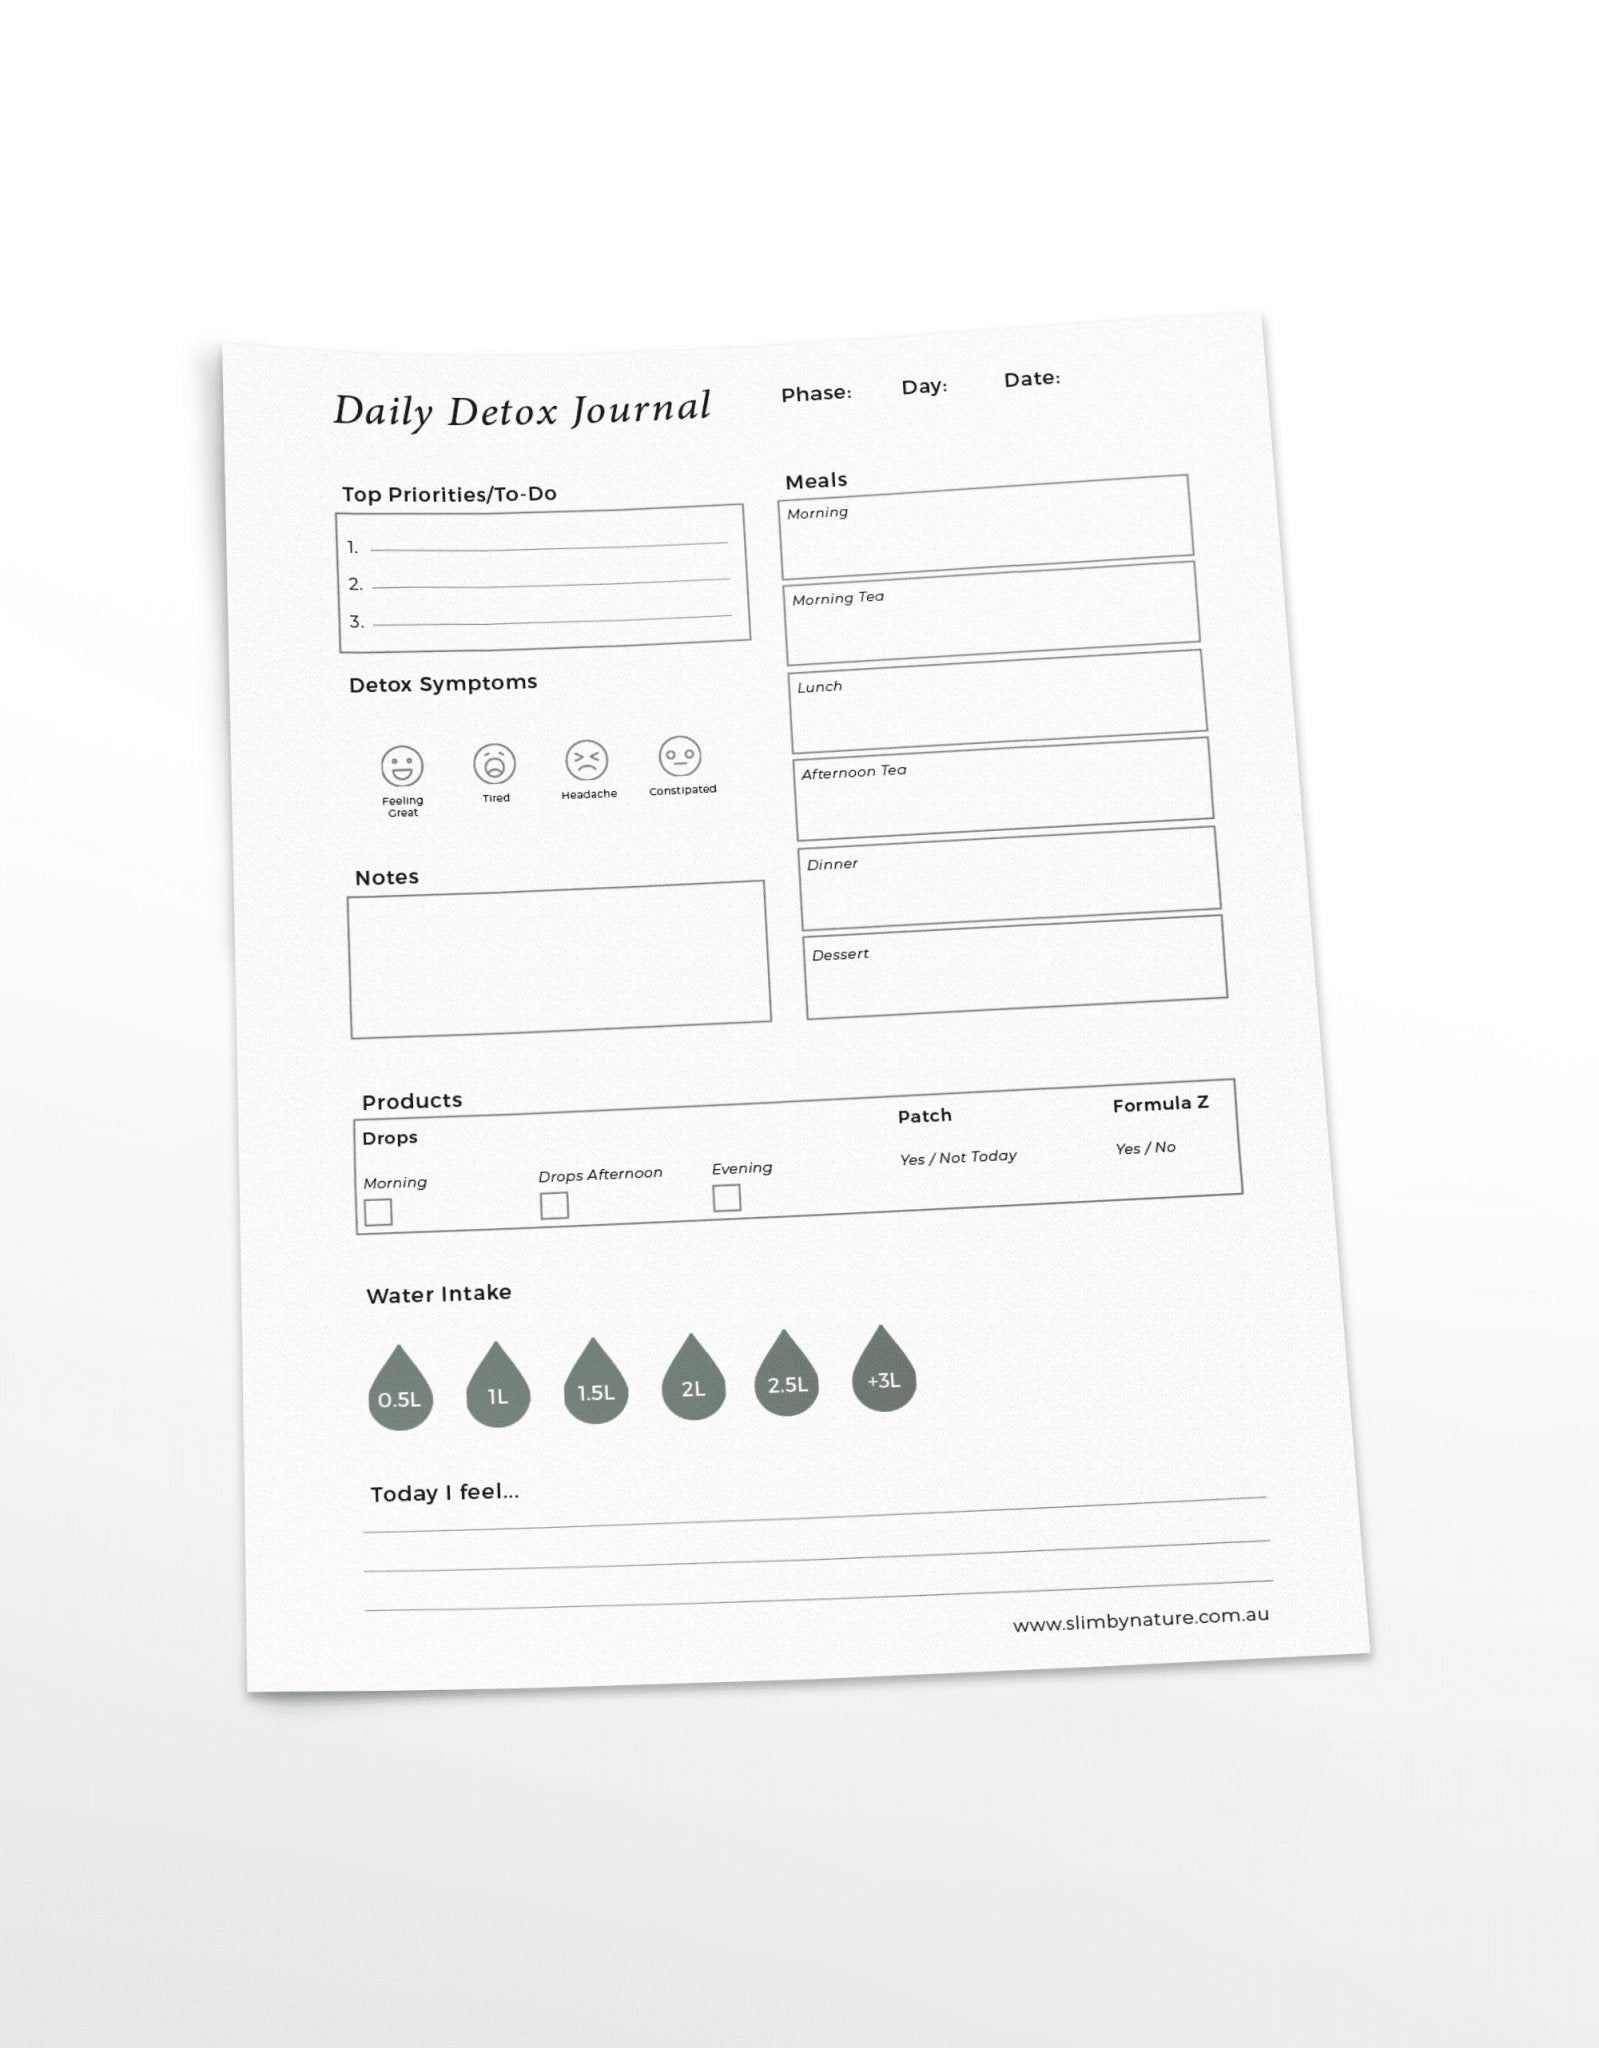 Daily Detox Journal Printable - My Store